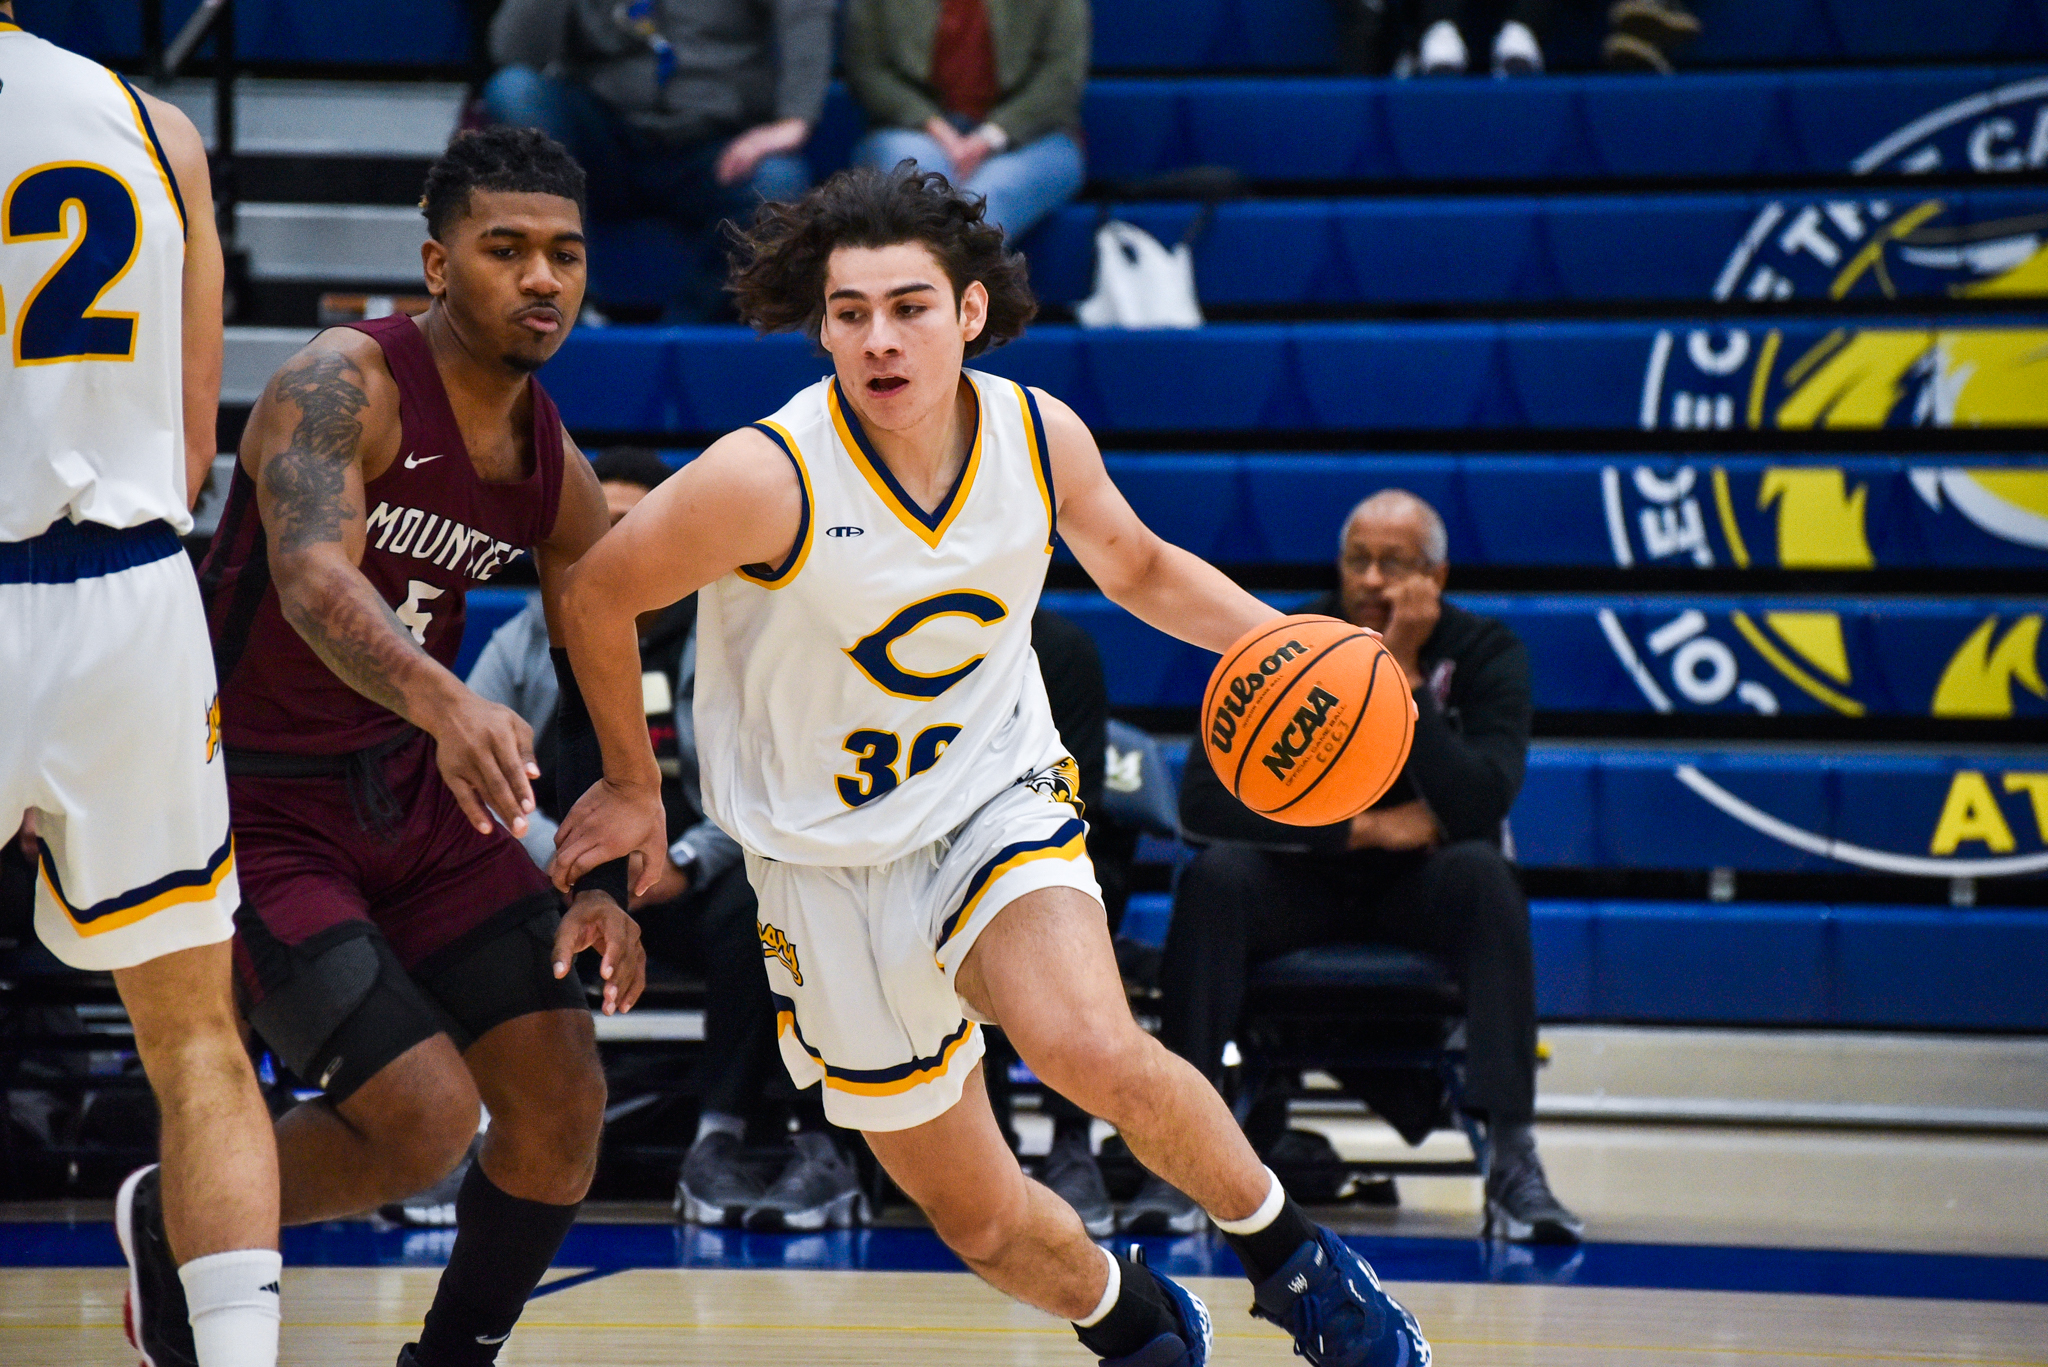 College of the Canyons men's basketball player Dillon Barrientos vs. Mt. SAC on Dec. 28, 2022.